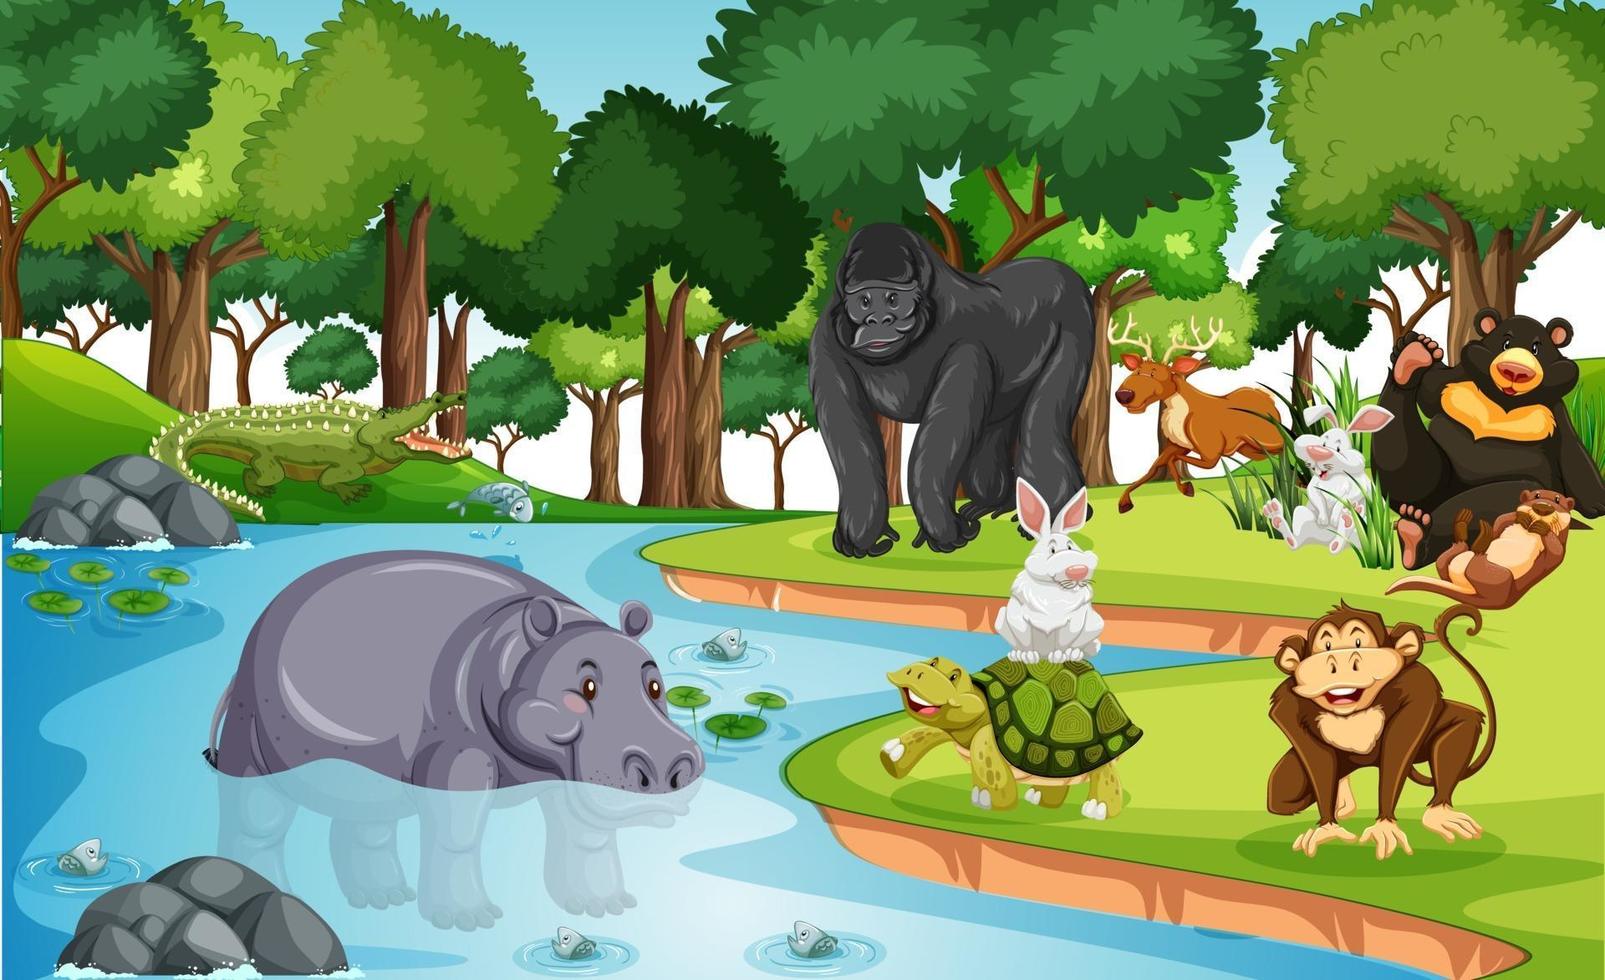 Many different animals in the forest scene vector